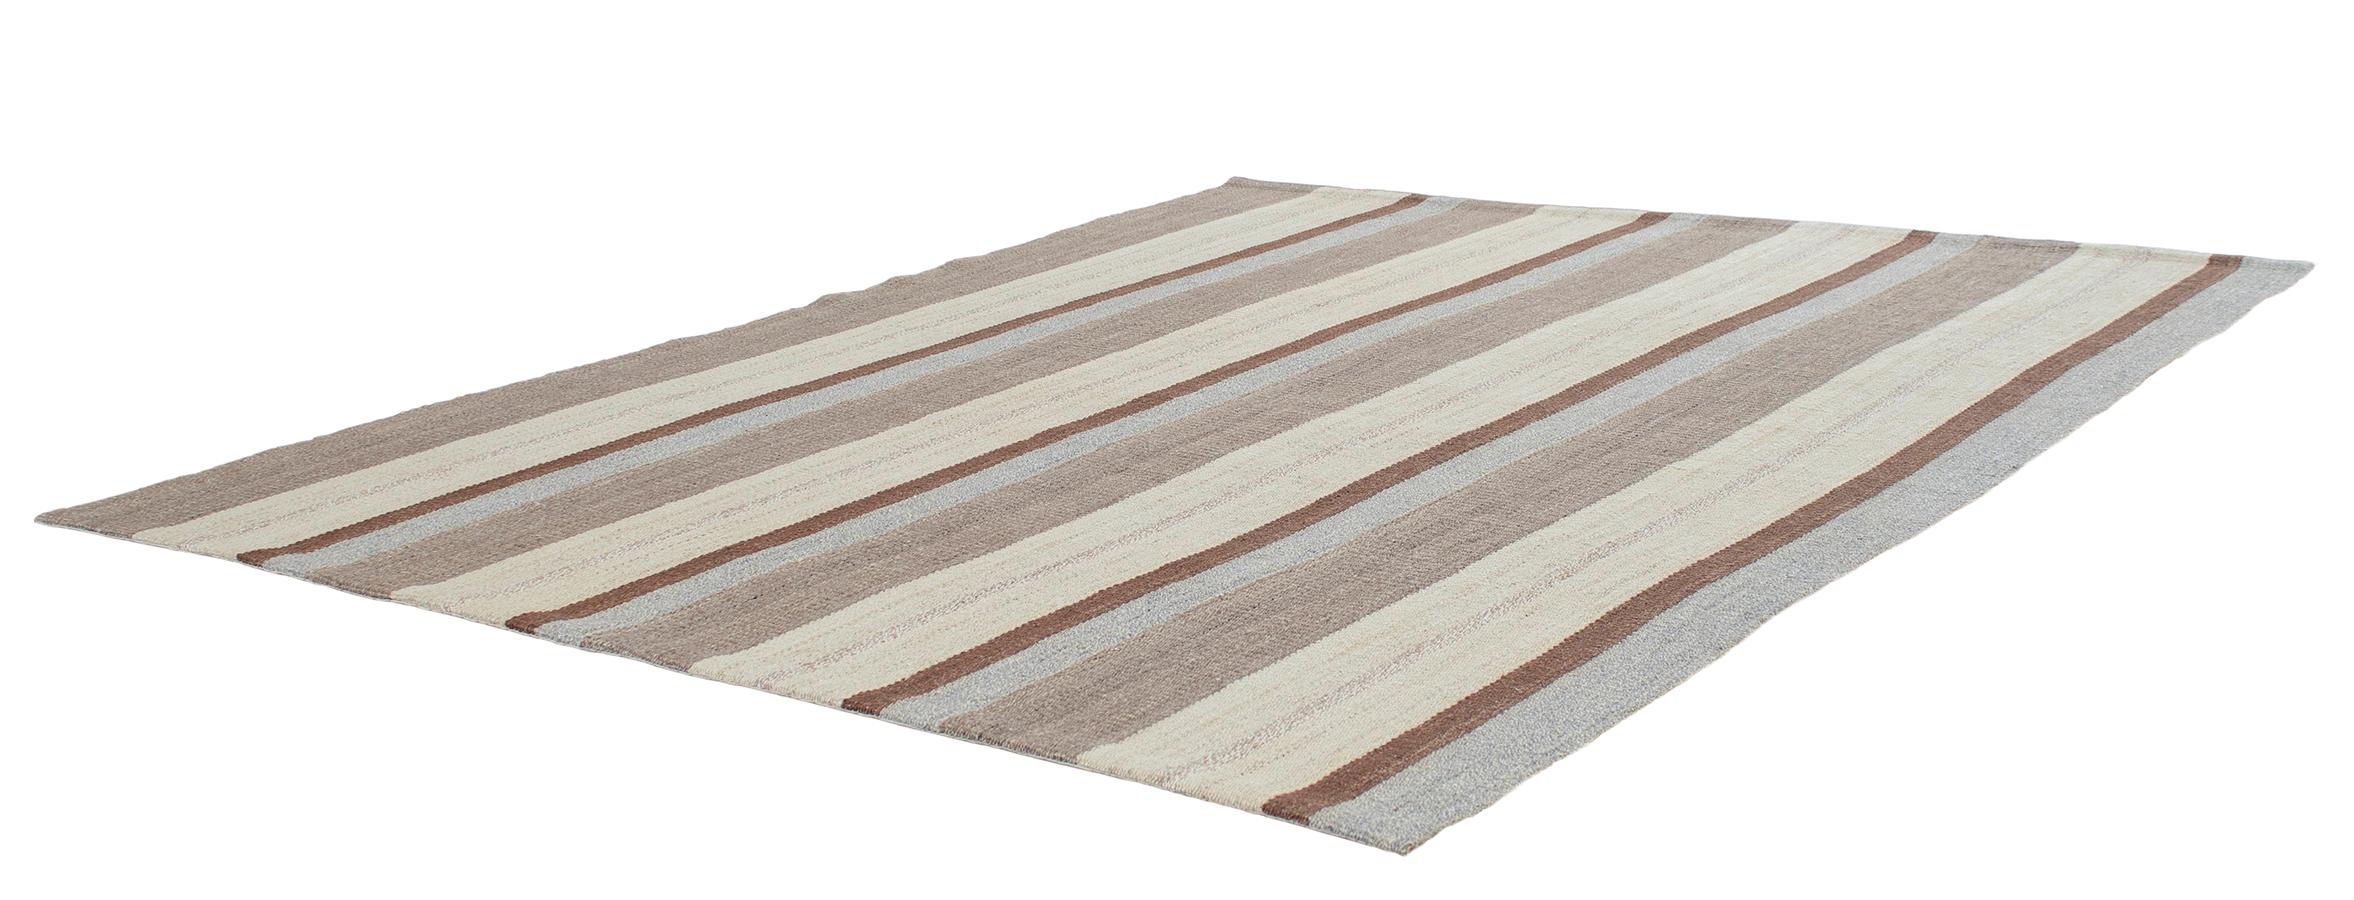 Hand-Woven Mid-Century Modern Style Minimalist Striped Flatweave Rug  For Sale